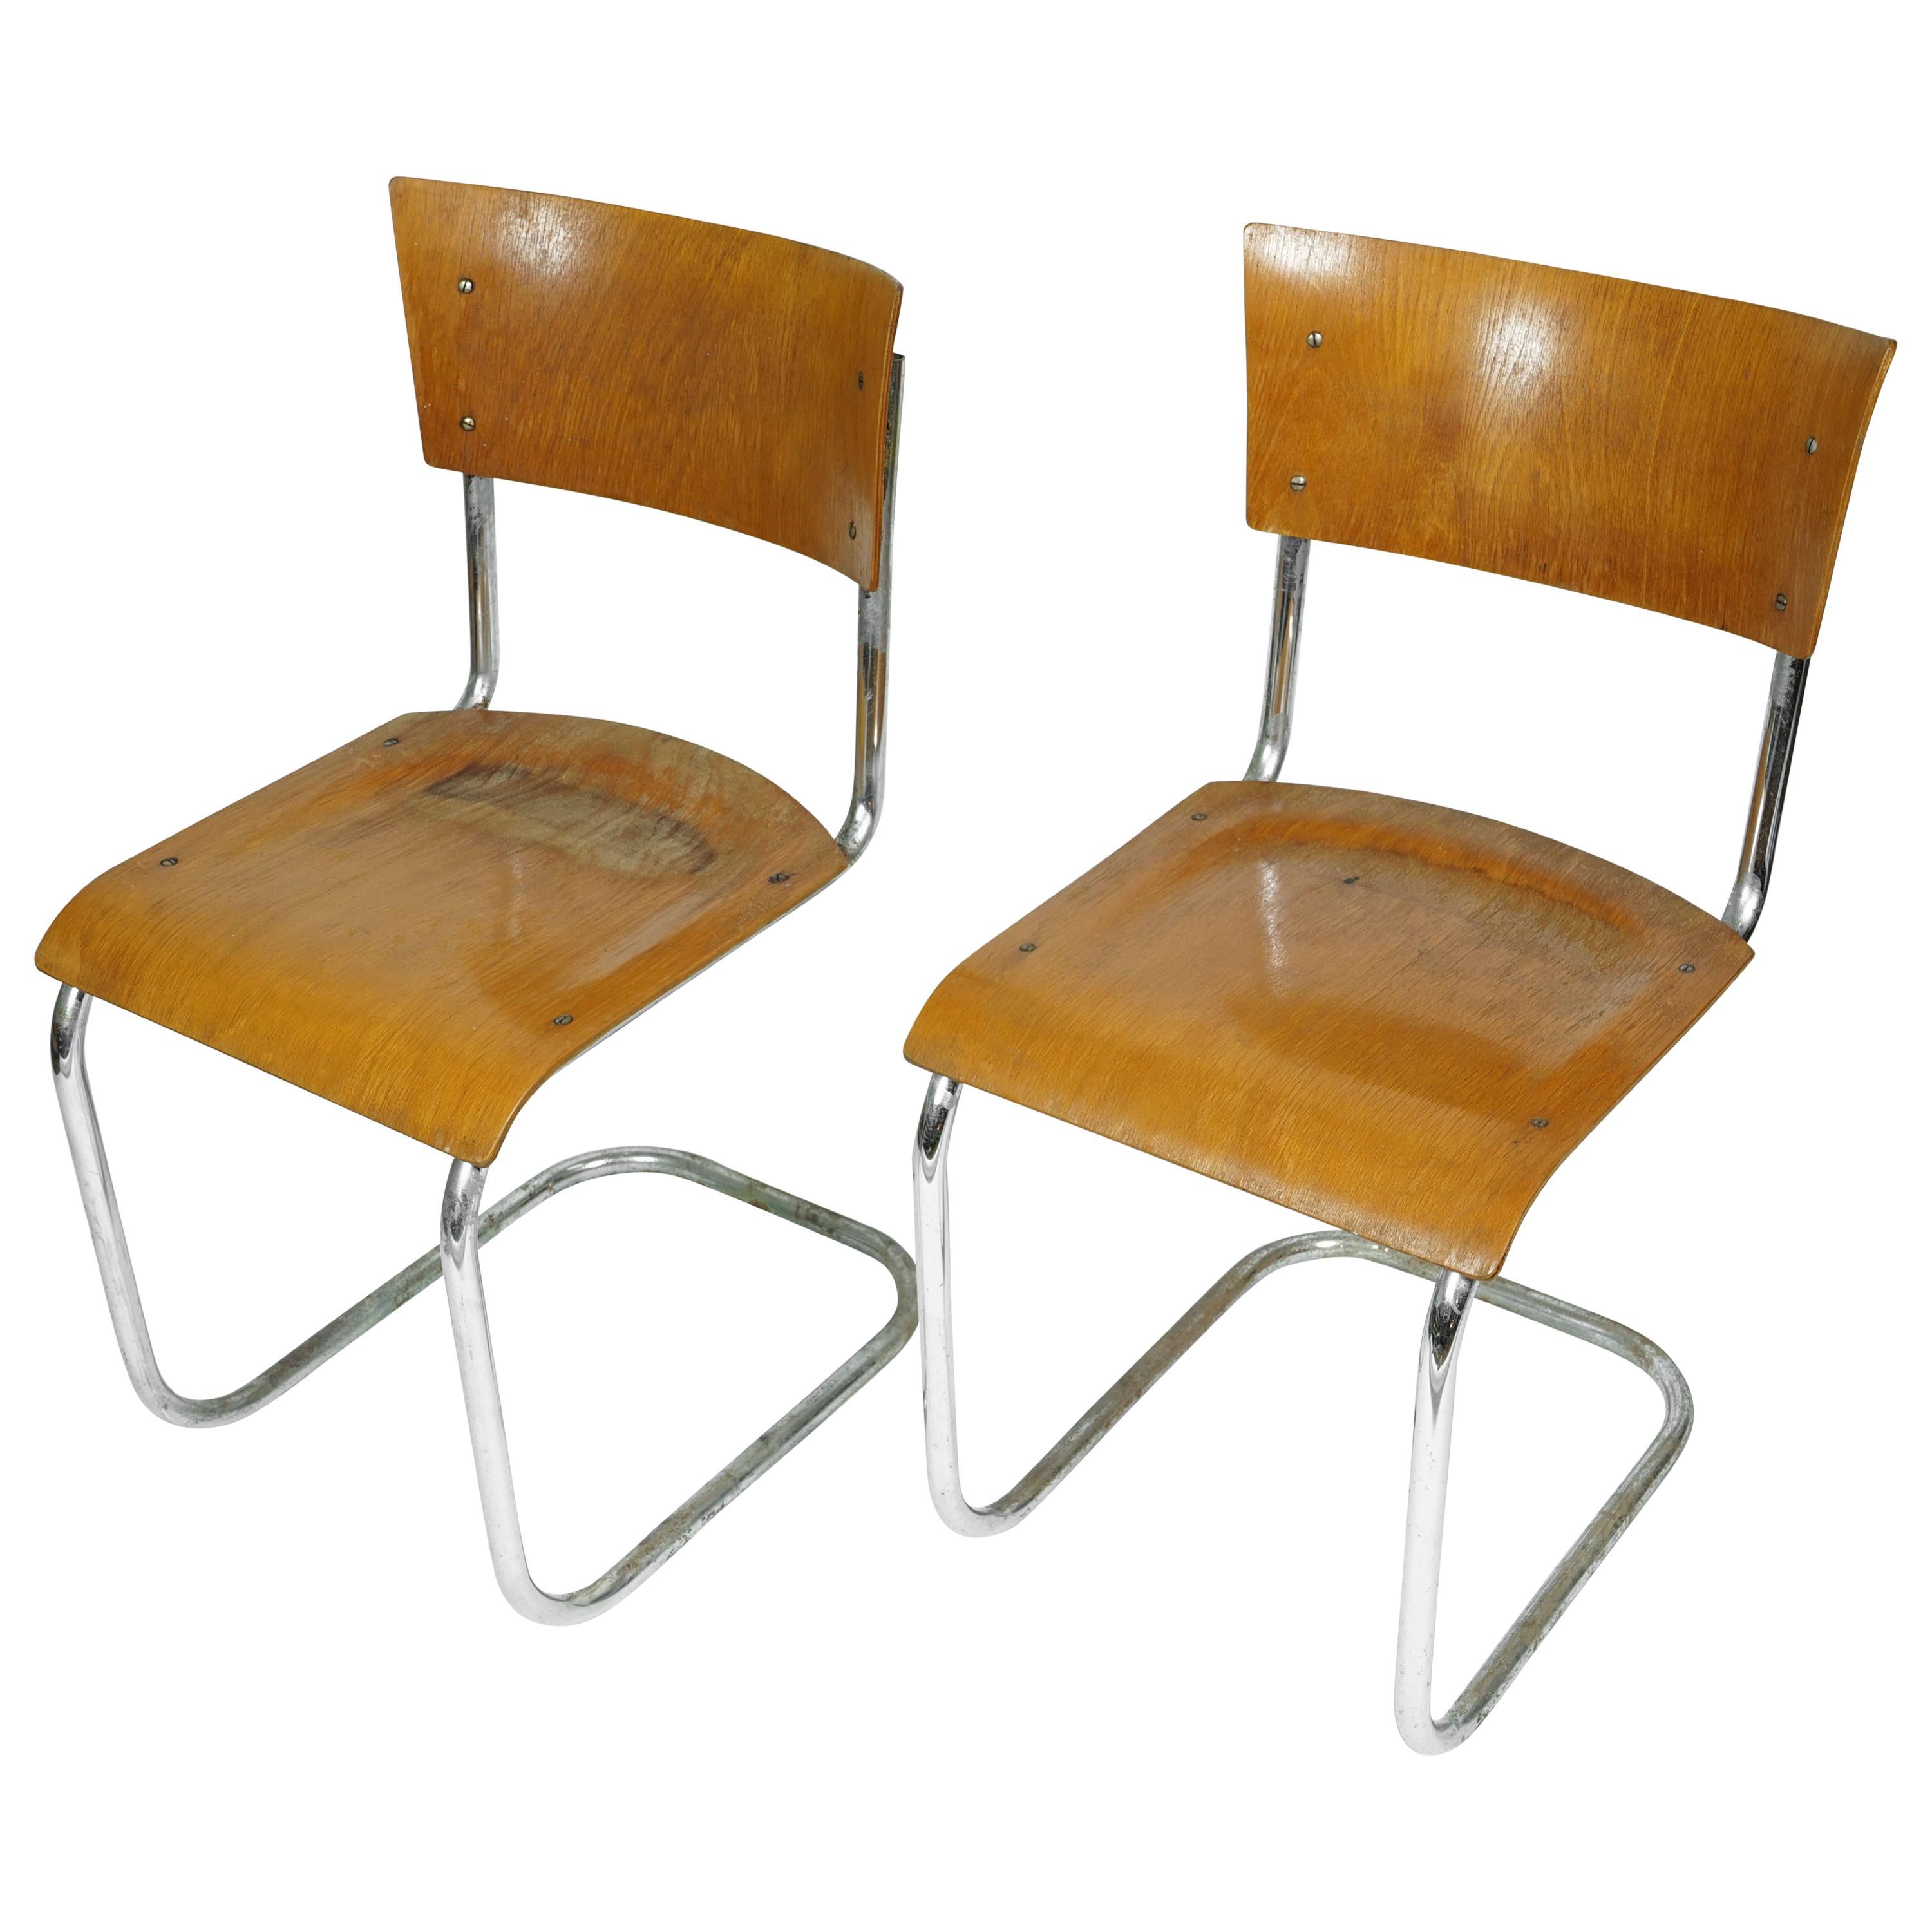 Plywood Cantilever Tubular Chairs Mart Stam, 1920s For Sale